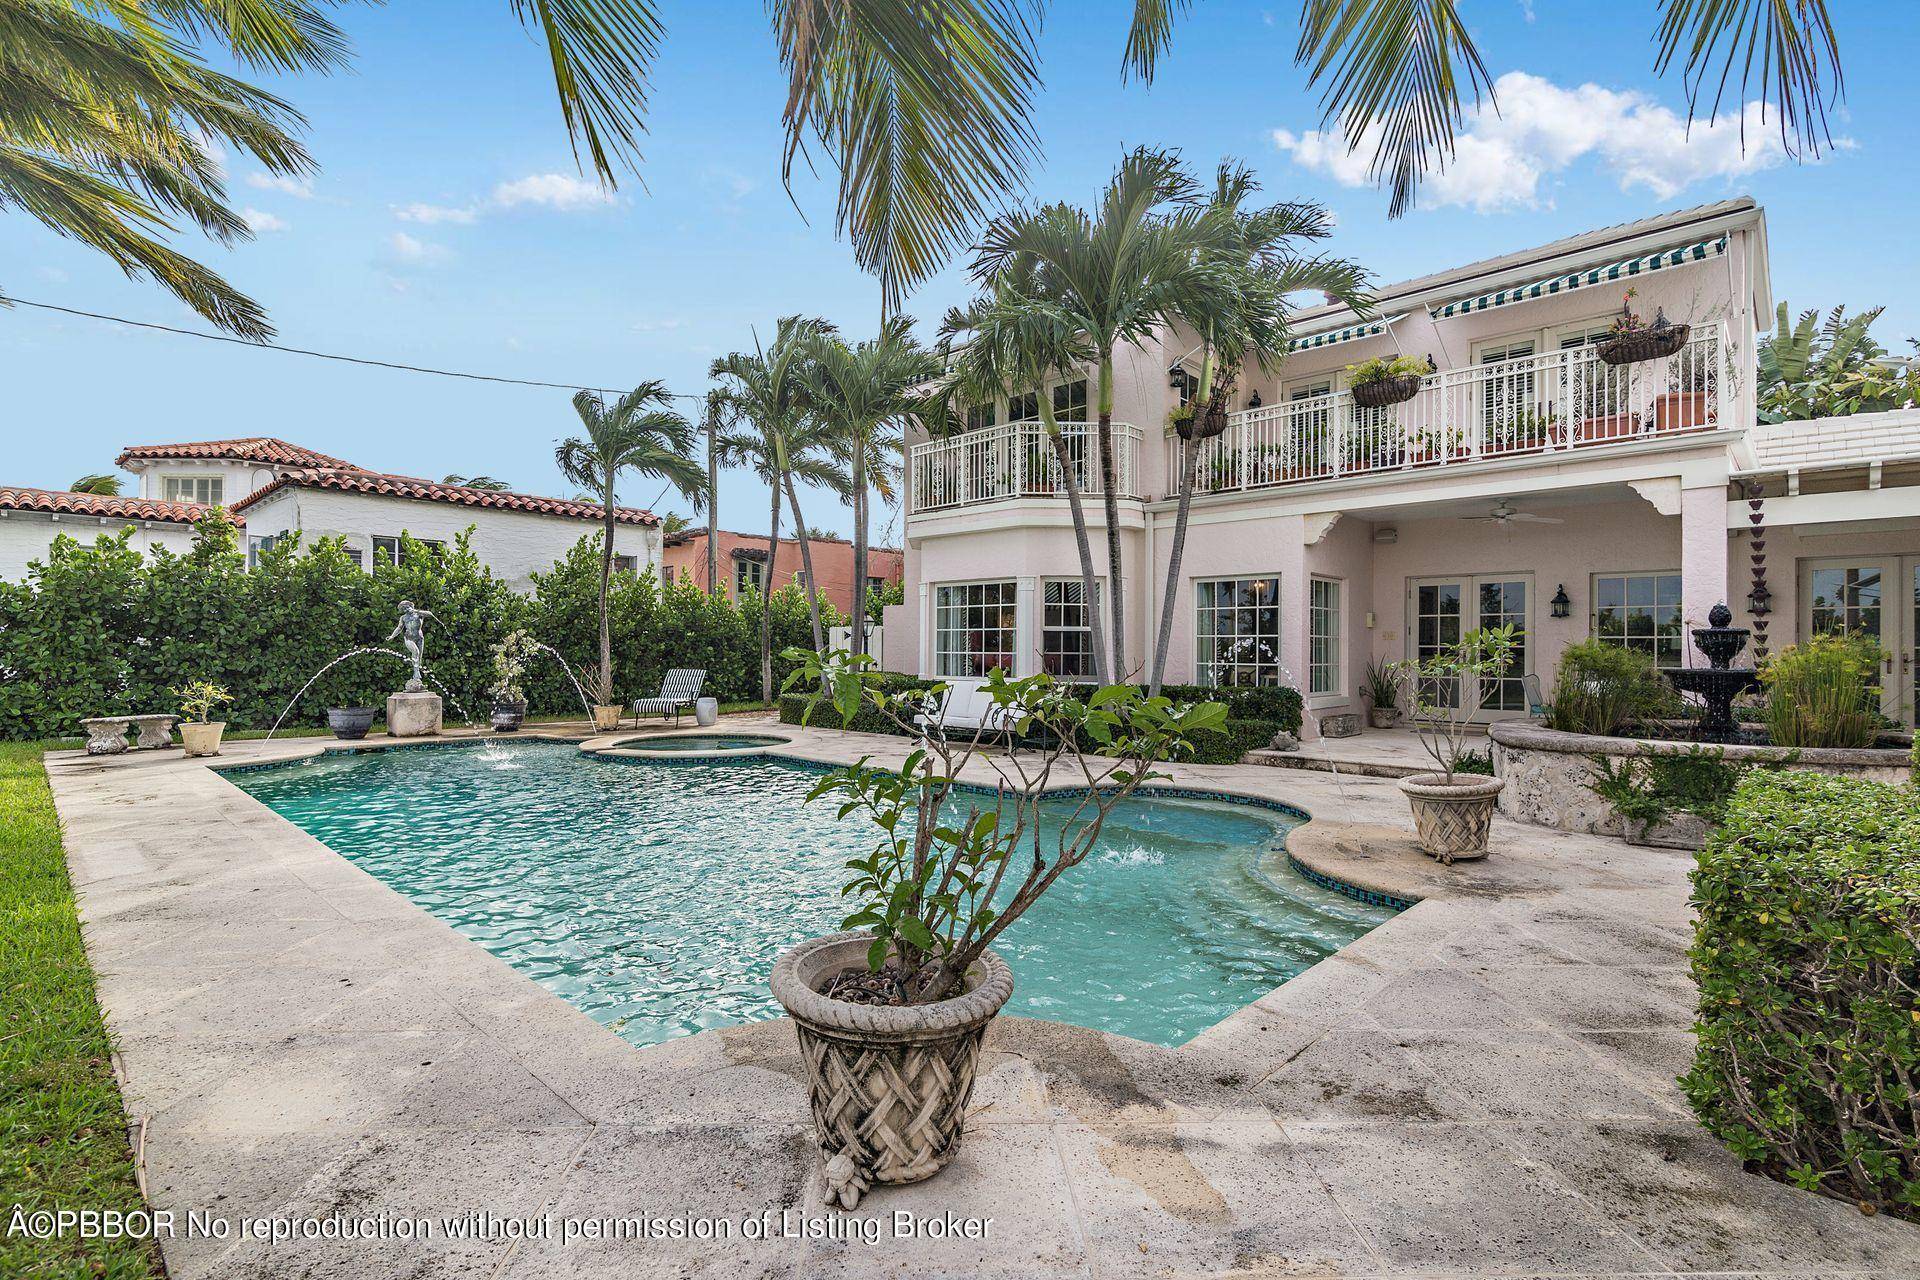 ''Palma Rosada'' Private Gated El Cid Estate This 1939 Maurice Fatio designed, secluded Hollywood Regency style estate, was completely restored and expanded in 2009.